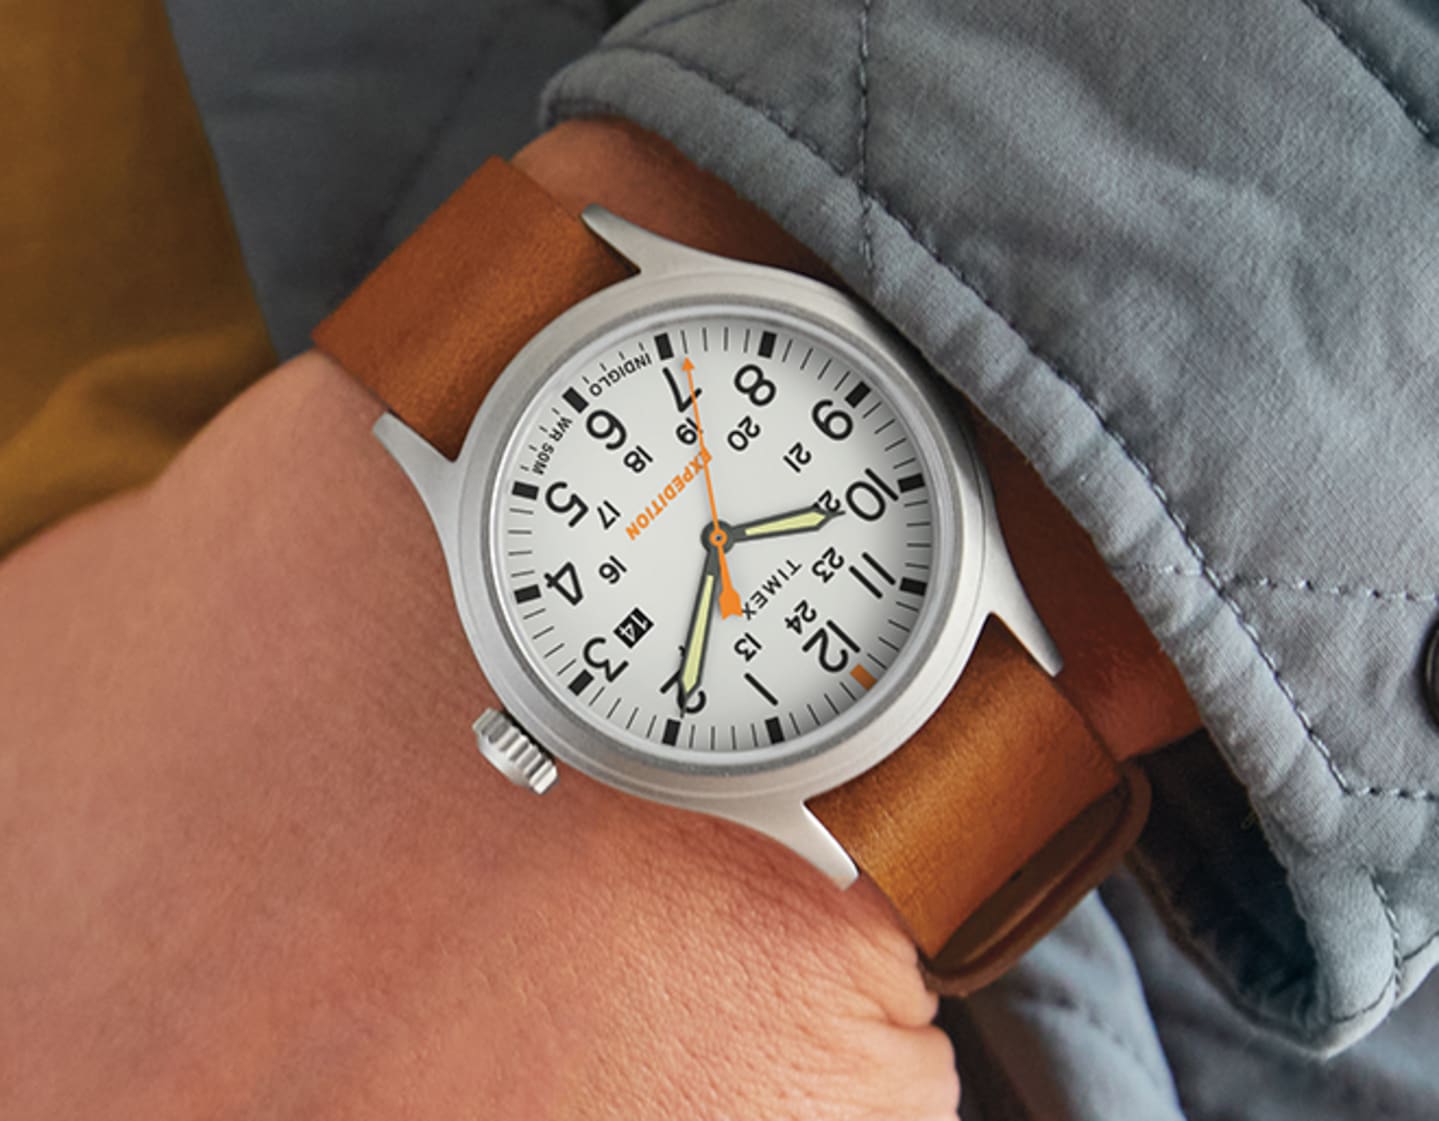 Expedition White Dial Wrist Watch.